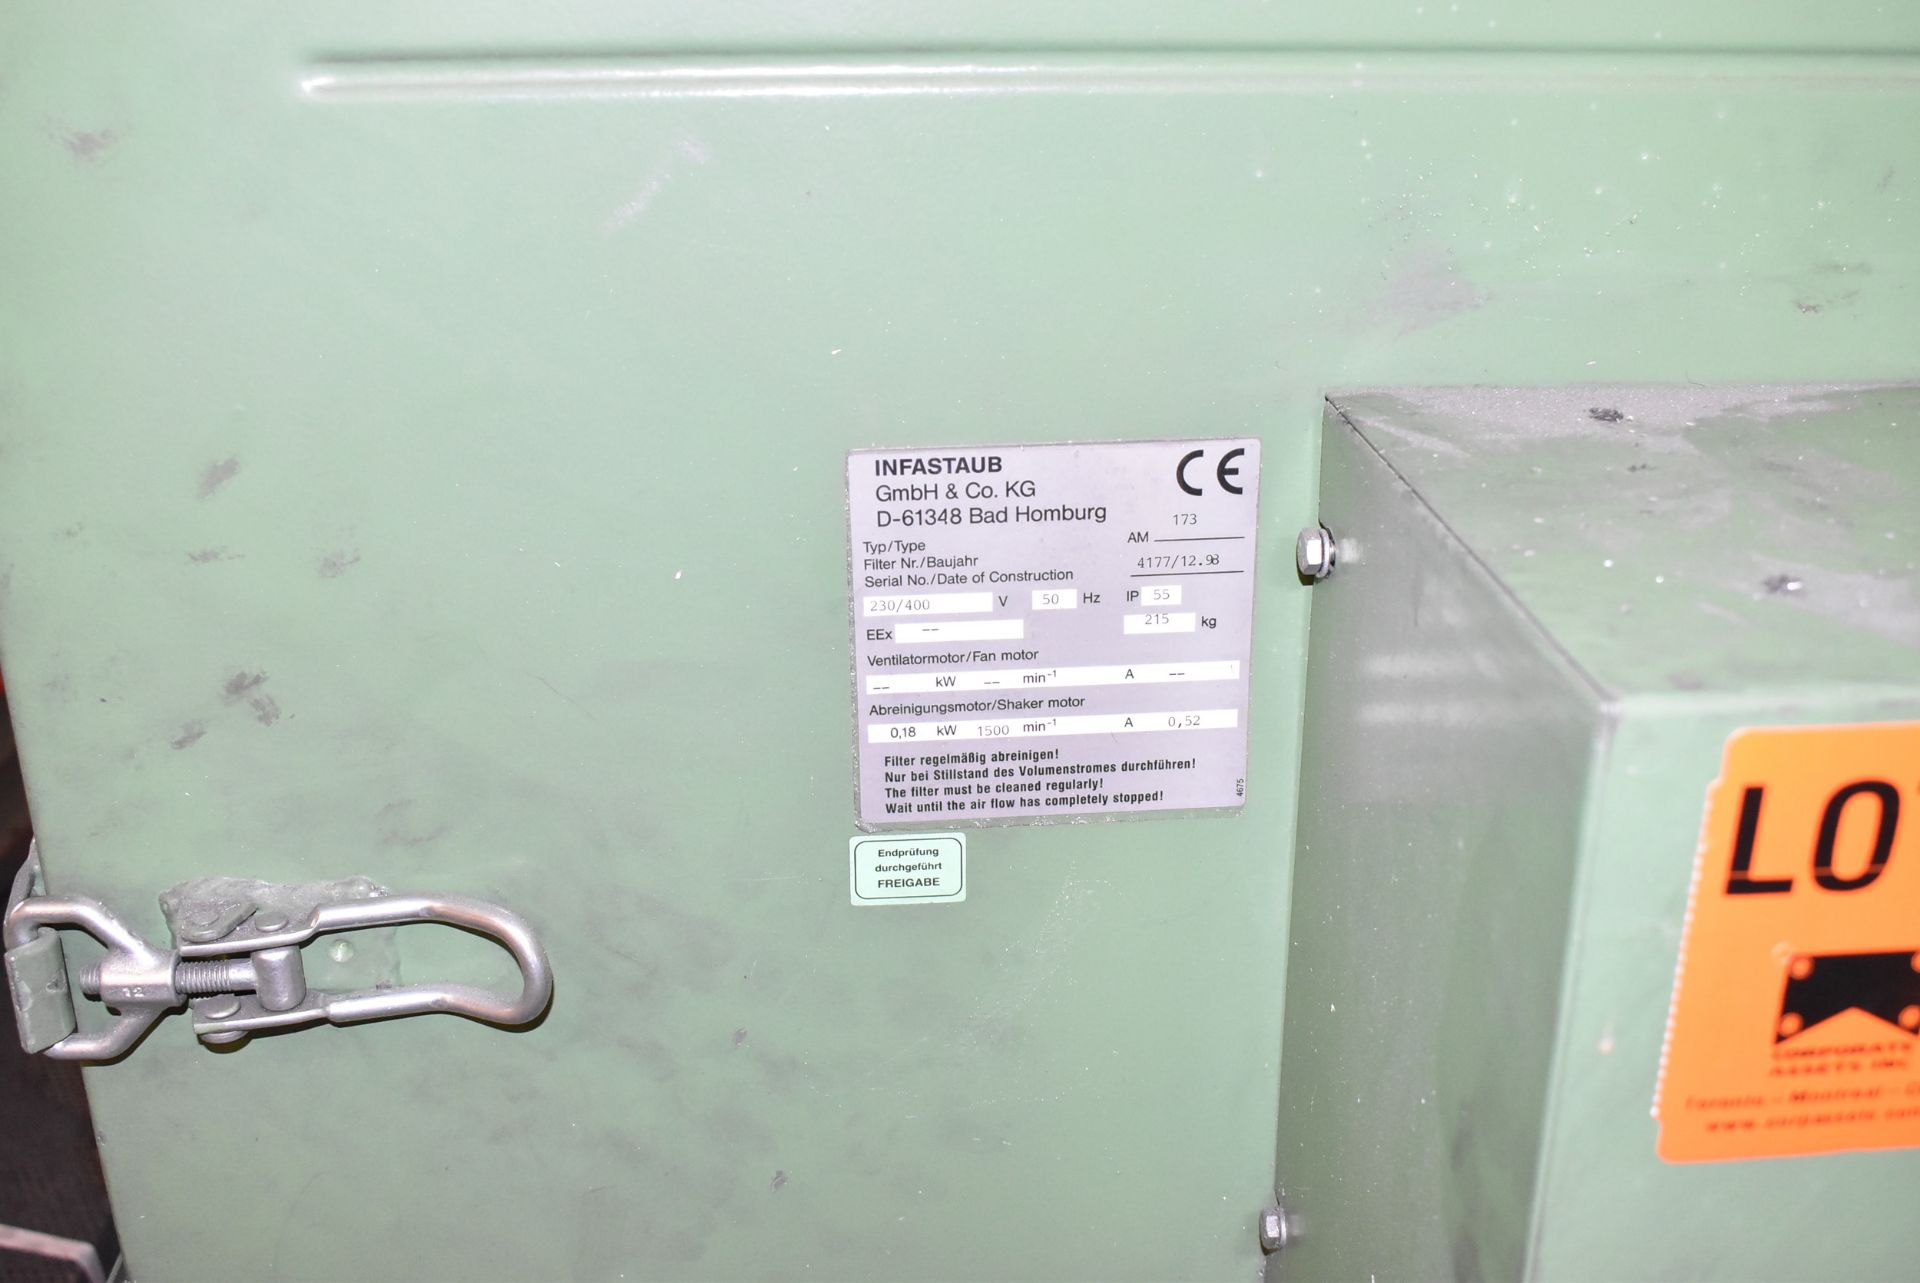 INFASTAUB AM173 DUST COLLECTOR, S/N 4177 (SEL) [Removal Fee = € 82.50 + applicable VAT - Gerritsen - Image 2 of 2